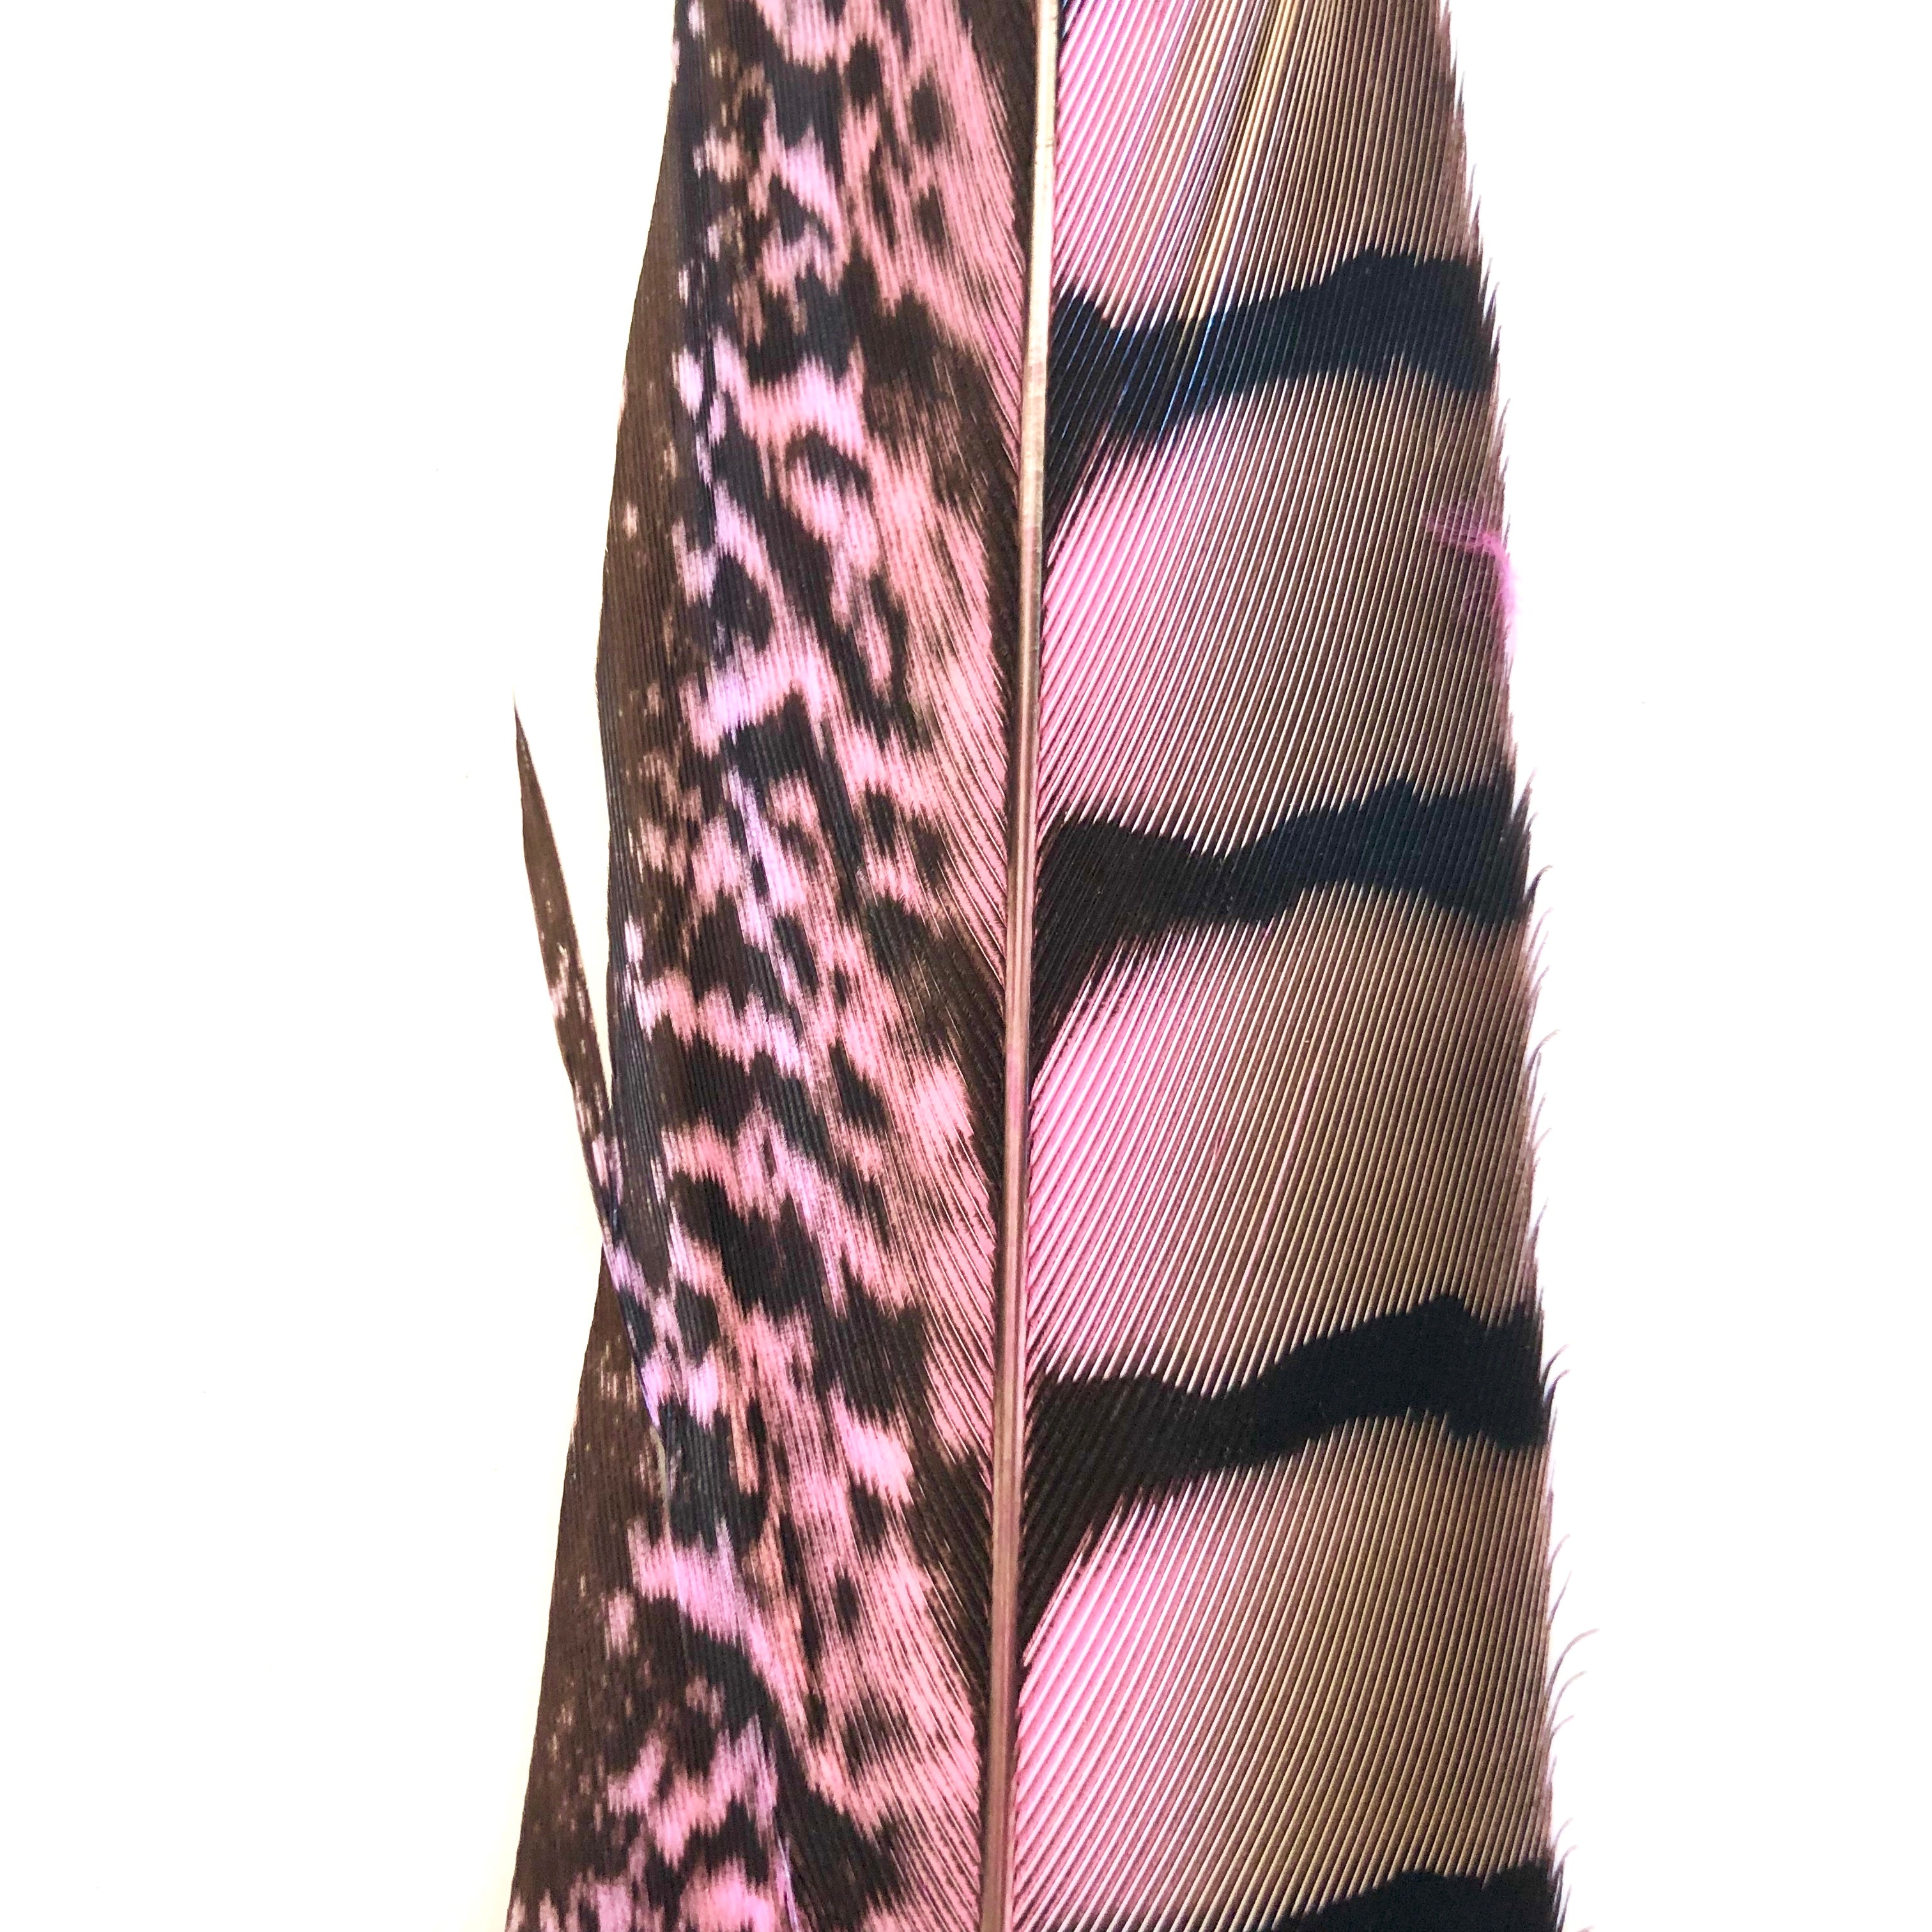 10" to 20" Lady Amherst Pheasant Side Tail Feather - Pink ((SECONDS))